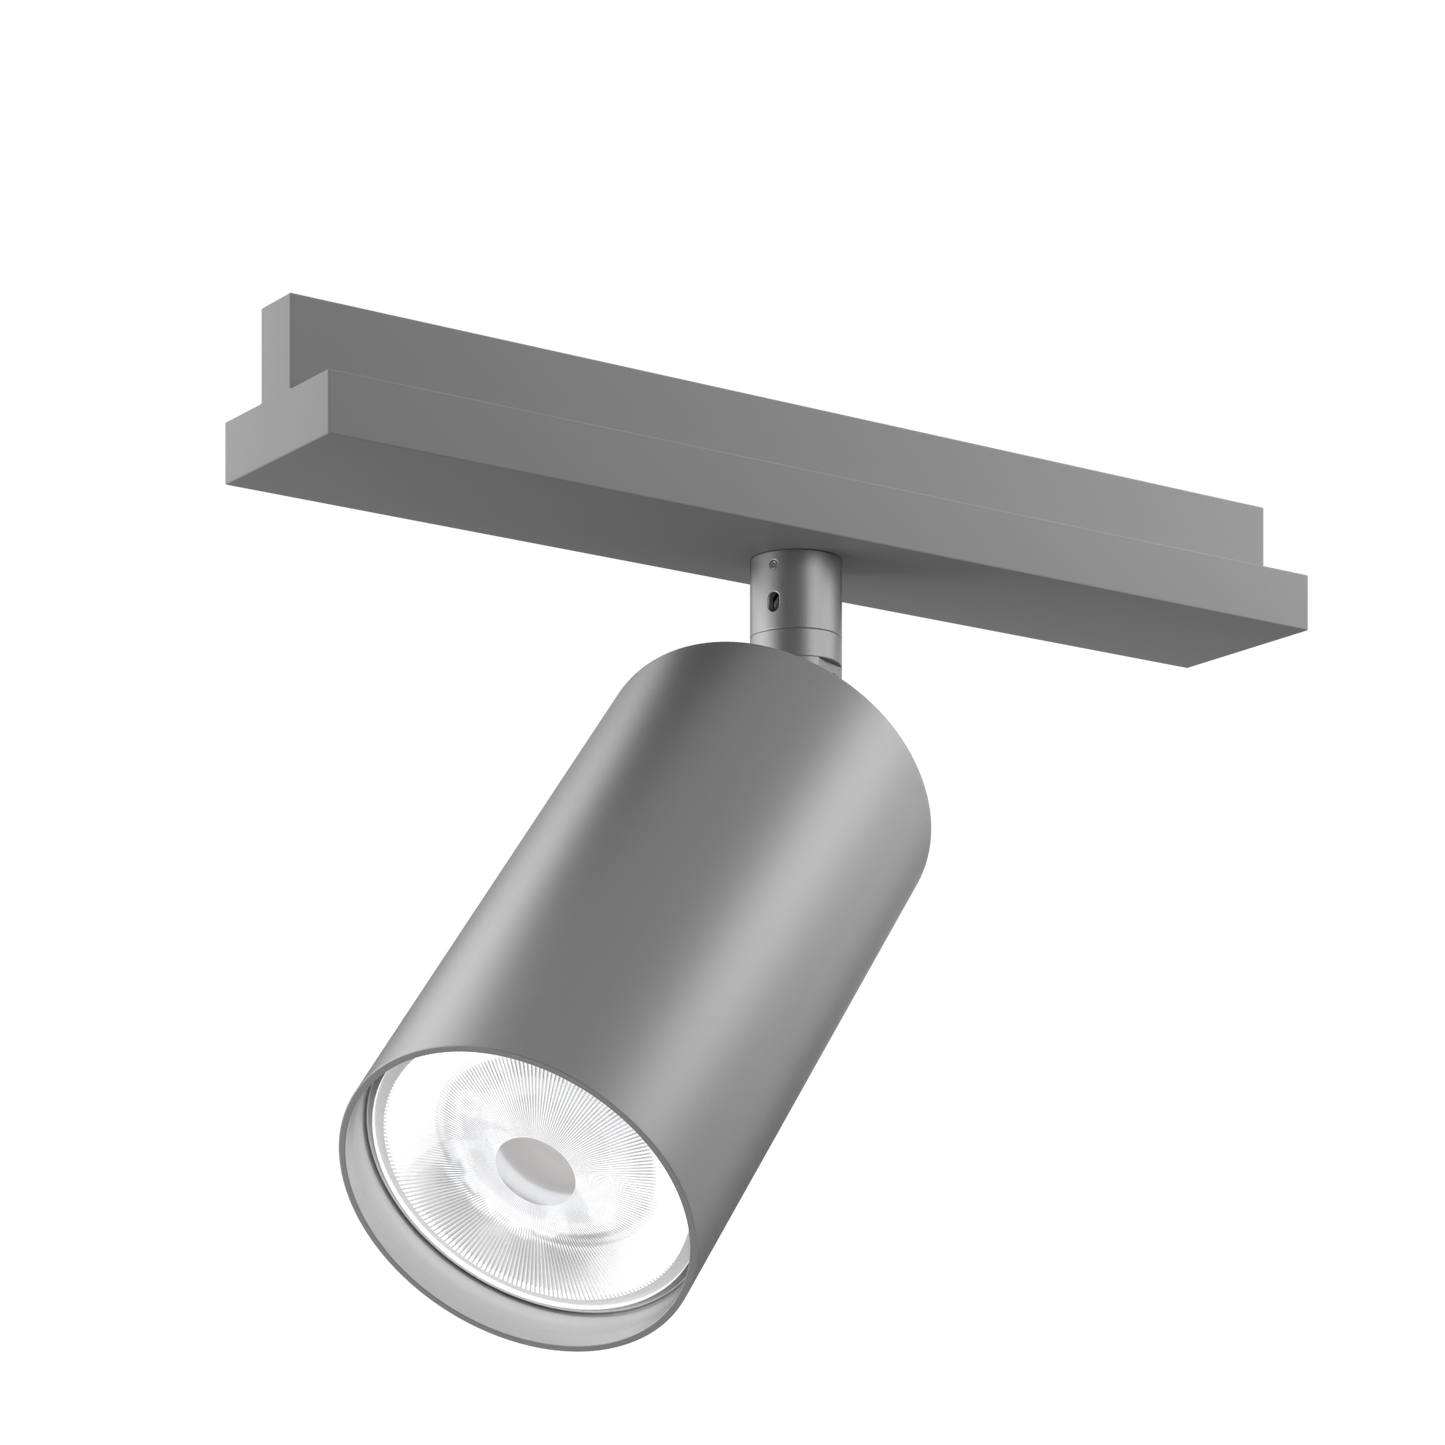 A sustainable, paint-free architectural spotlight that's designed for circular economy, on a track adaptor with integral driver